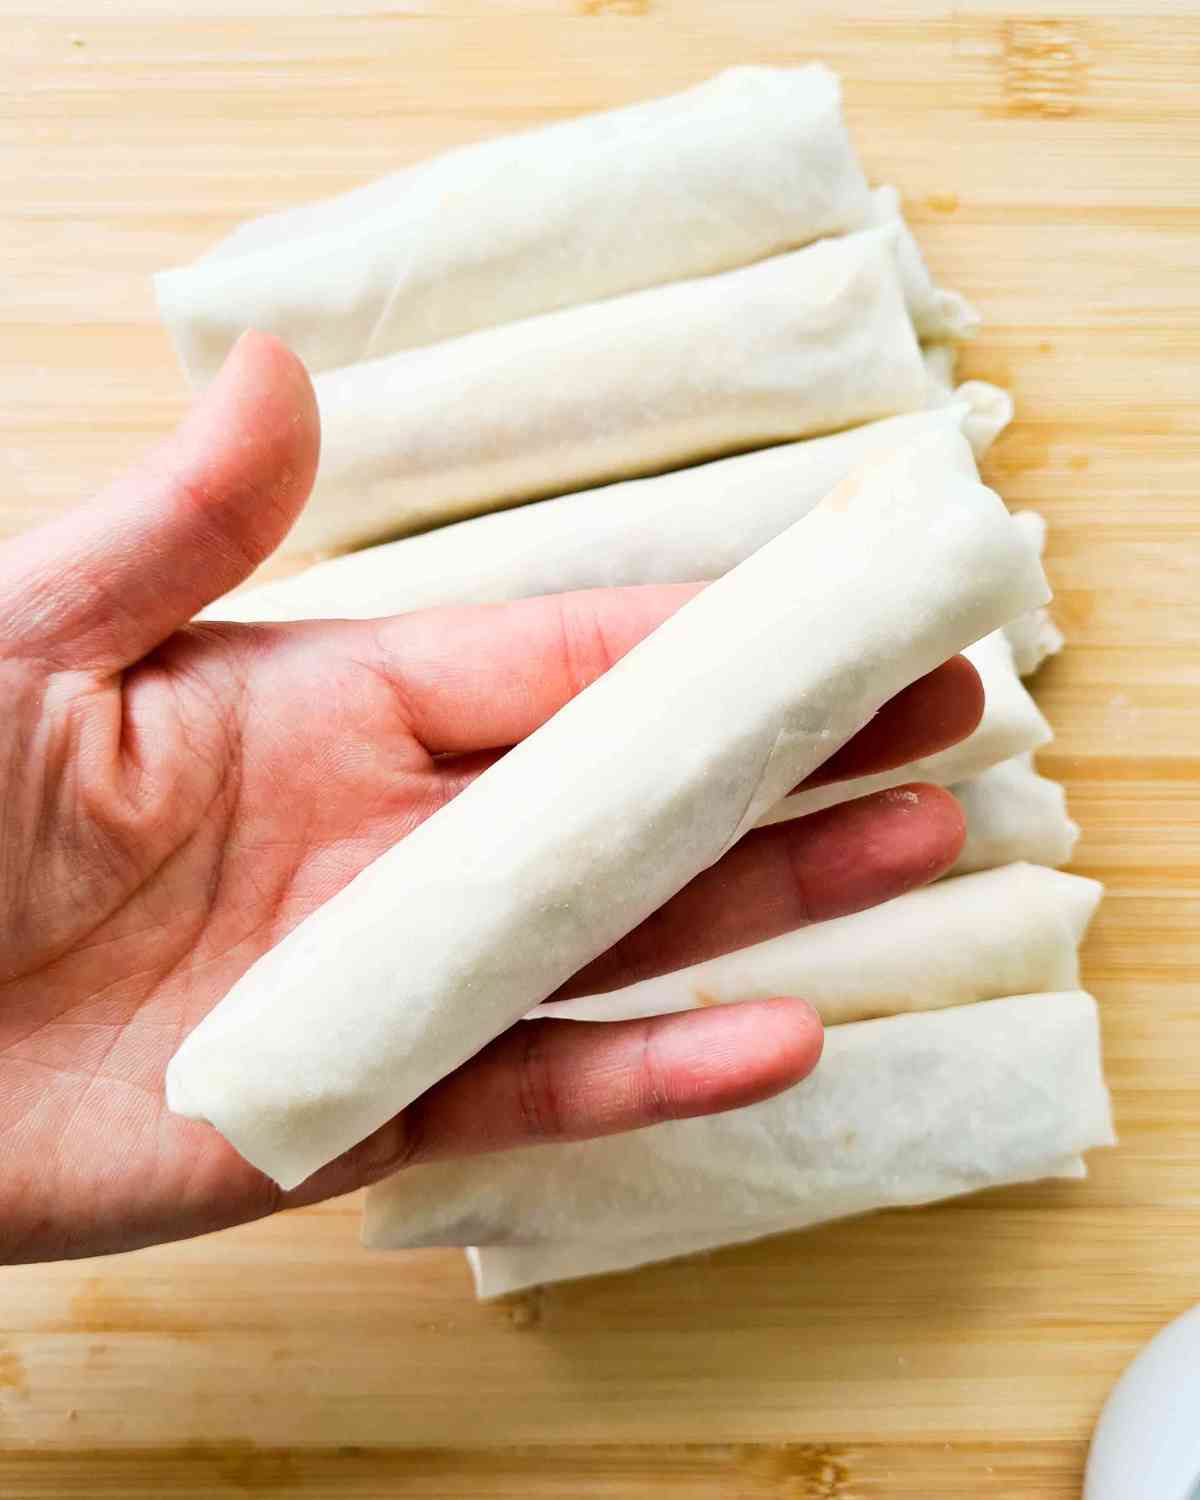 a stack of rolled pastries with one held up by a hand